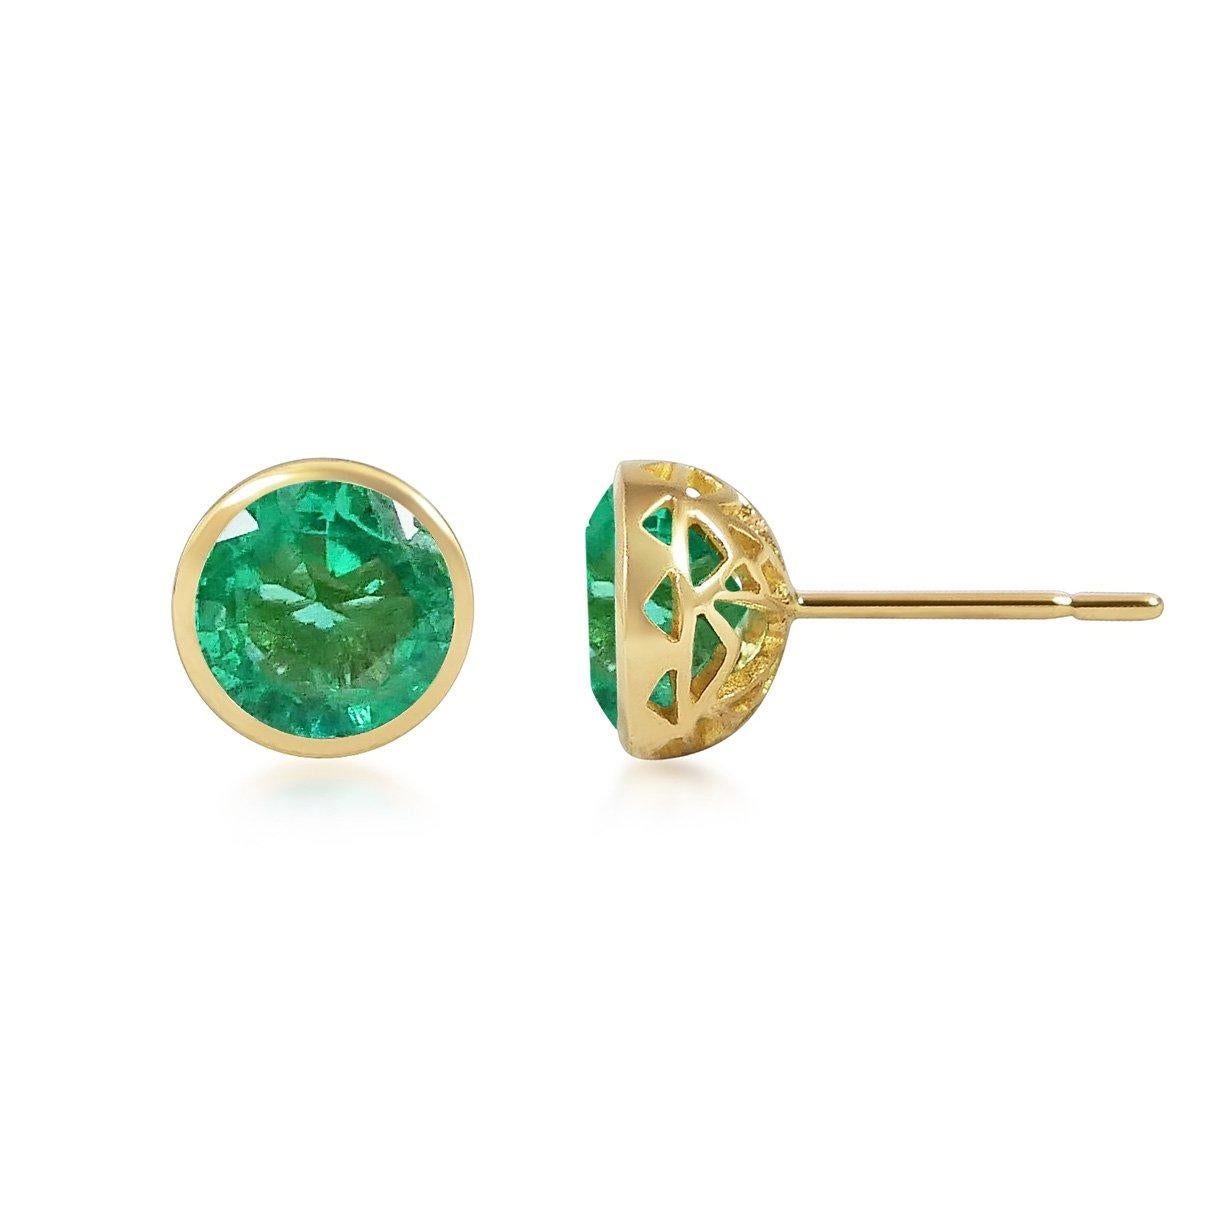 Handcrafted 2.00 Carats Emerald 18 Karat Yellow Gold Stud Earrings. The 8mm natural stones are set in our iconic hand pierced gold lace to let the light through our precious and fine stones our earrings are the perfect everyday wear.

Emeralds are